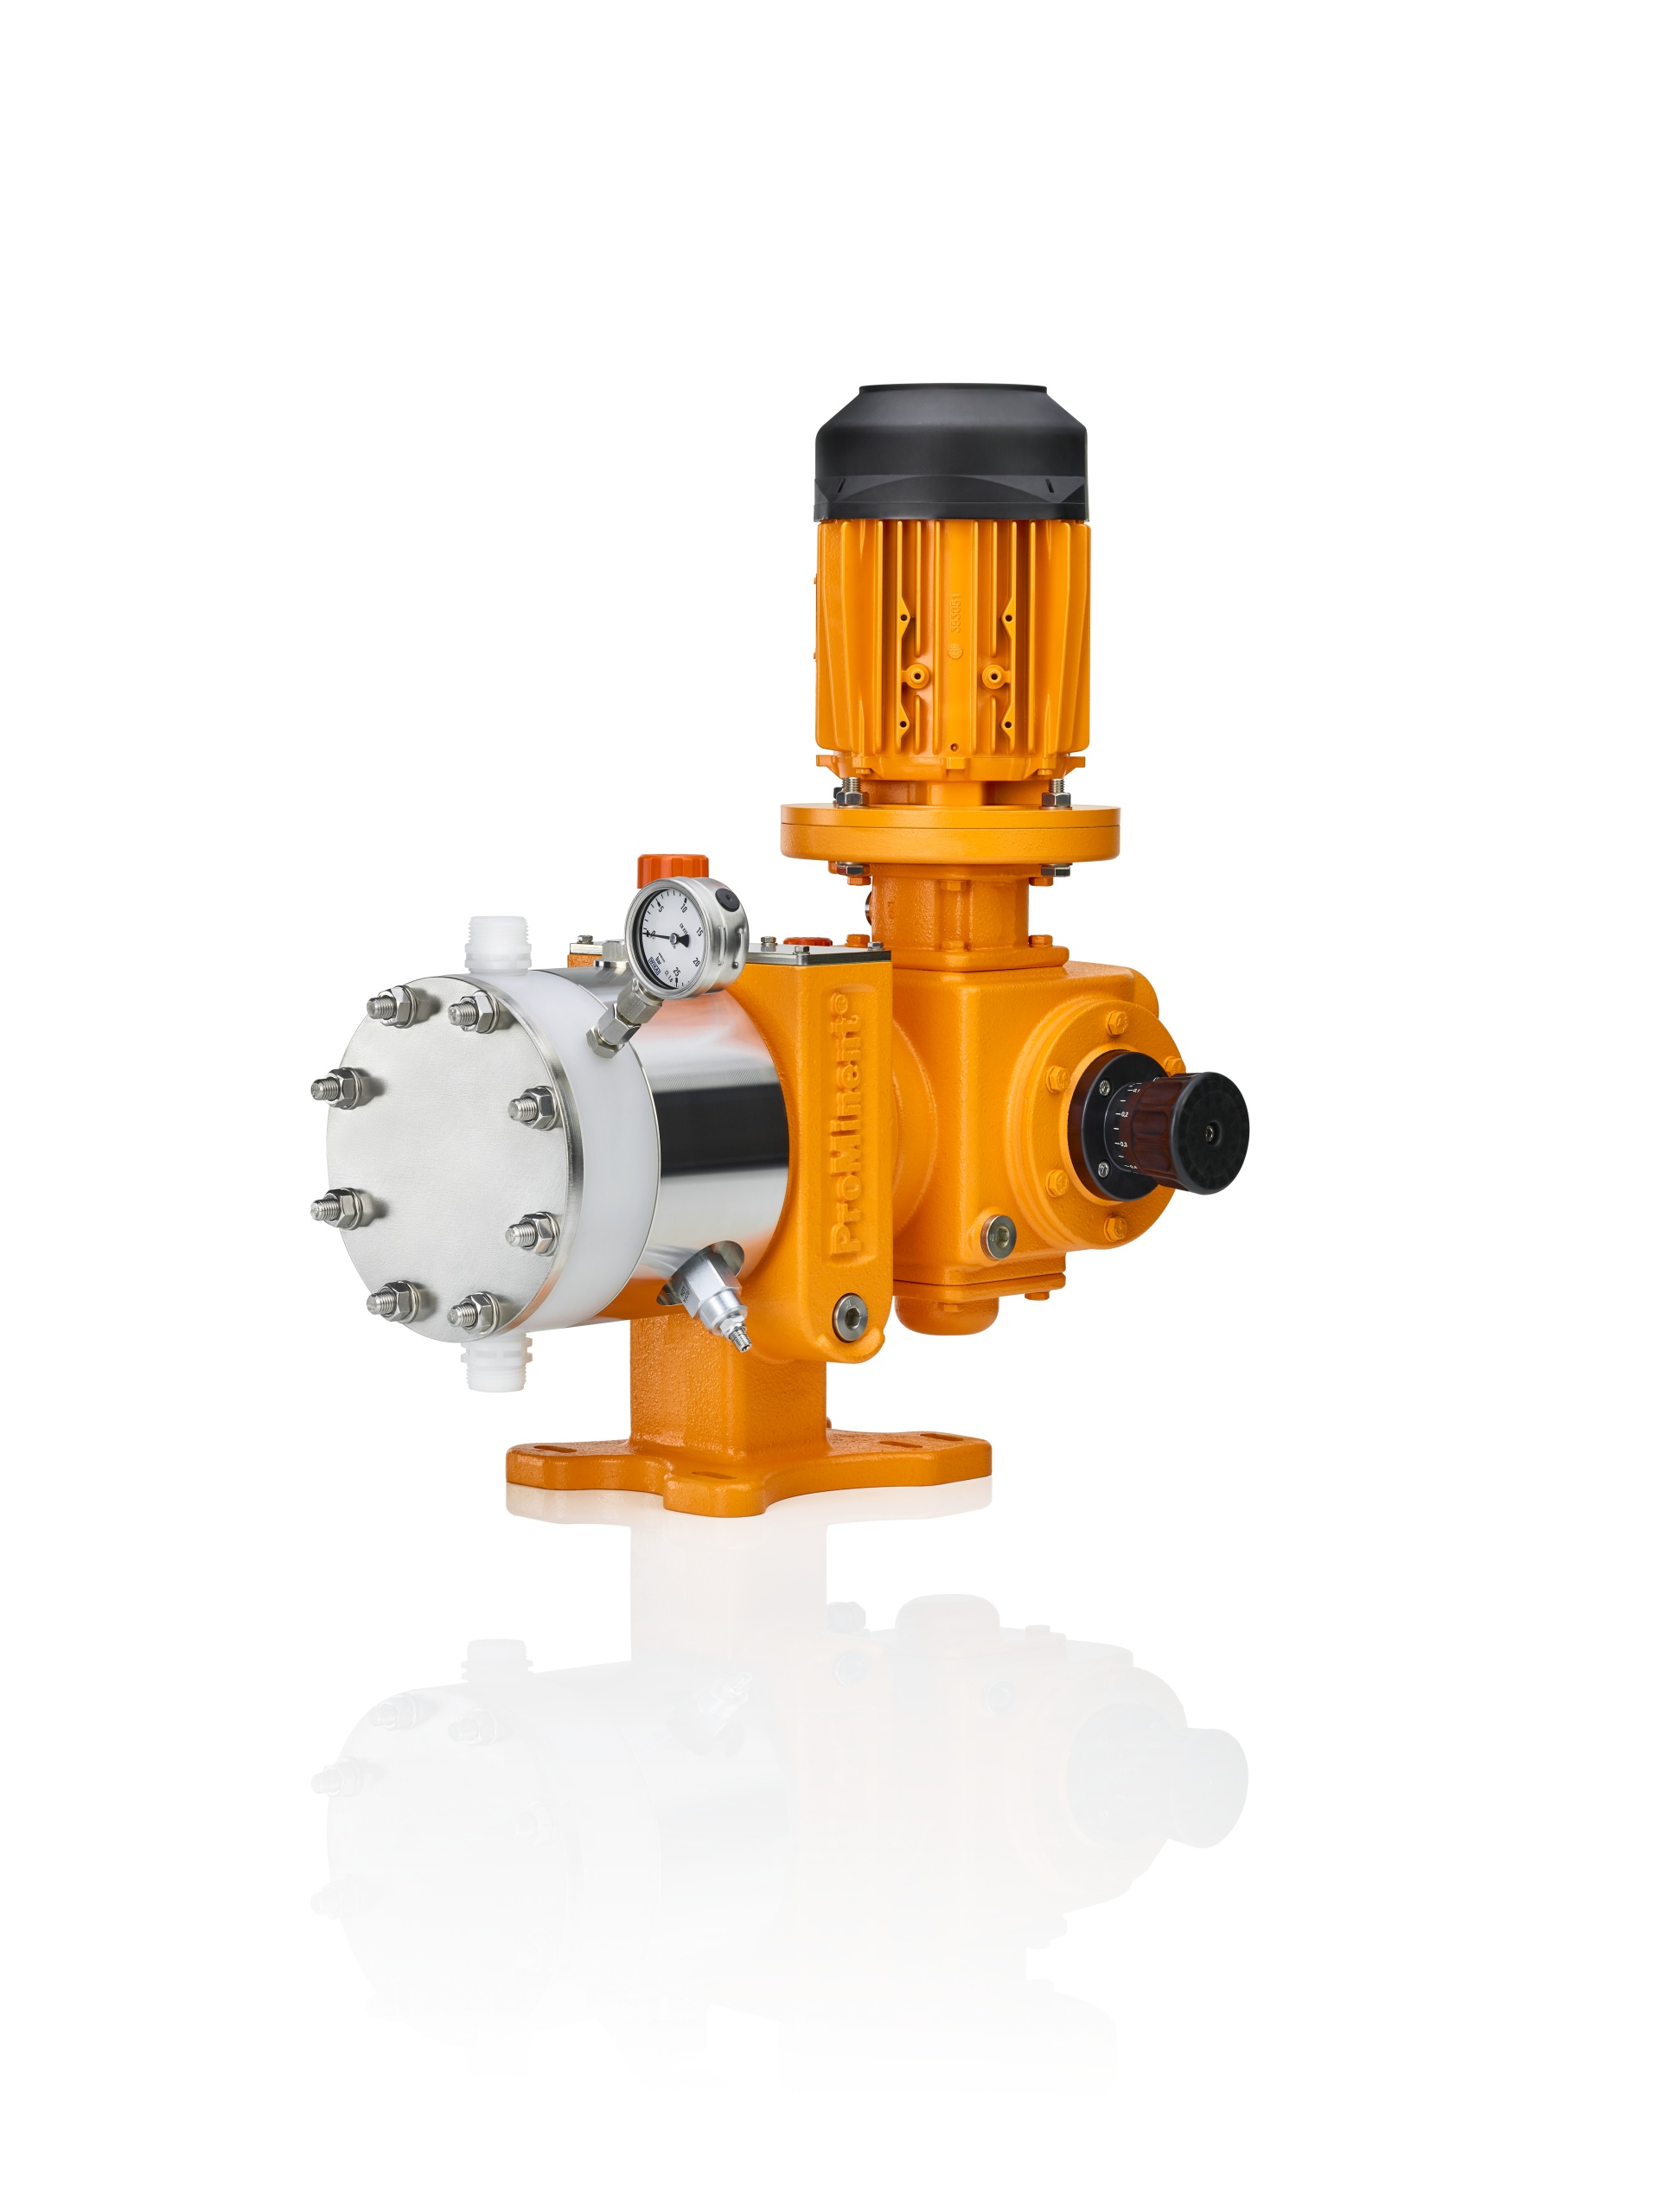 ProMinent will be showcasing its Orlita Evolution EF2a plunger metering pump at this year’s Pumps & Valves trade fair.